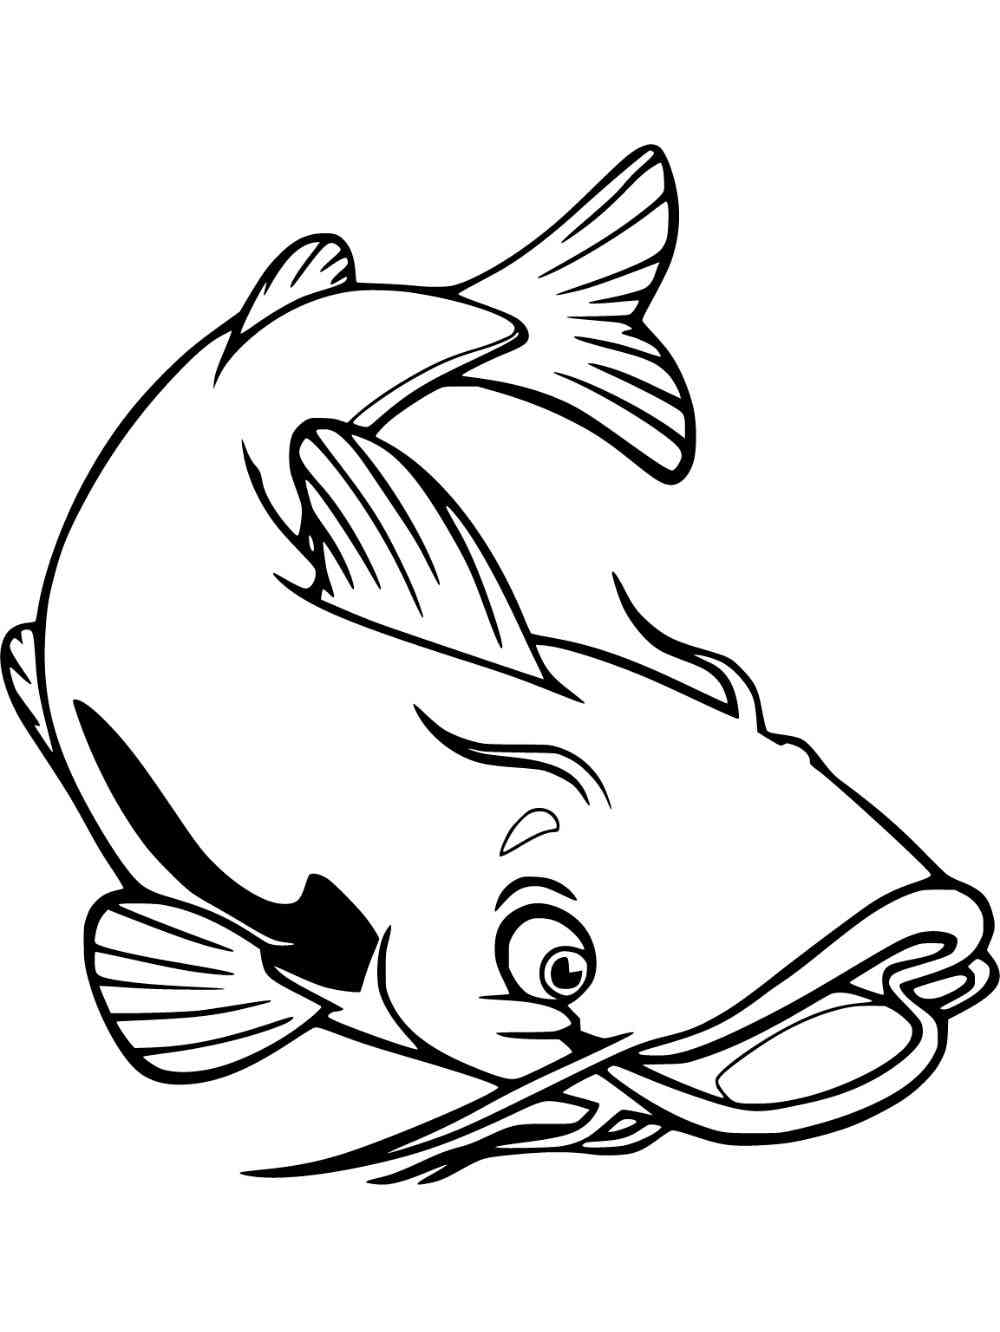 Catfish 1 coloring page